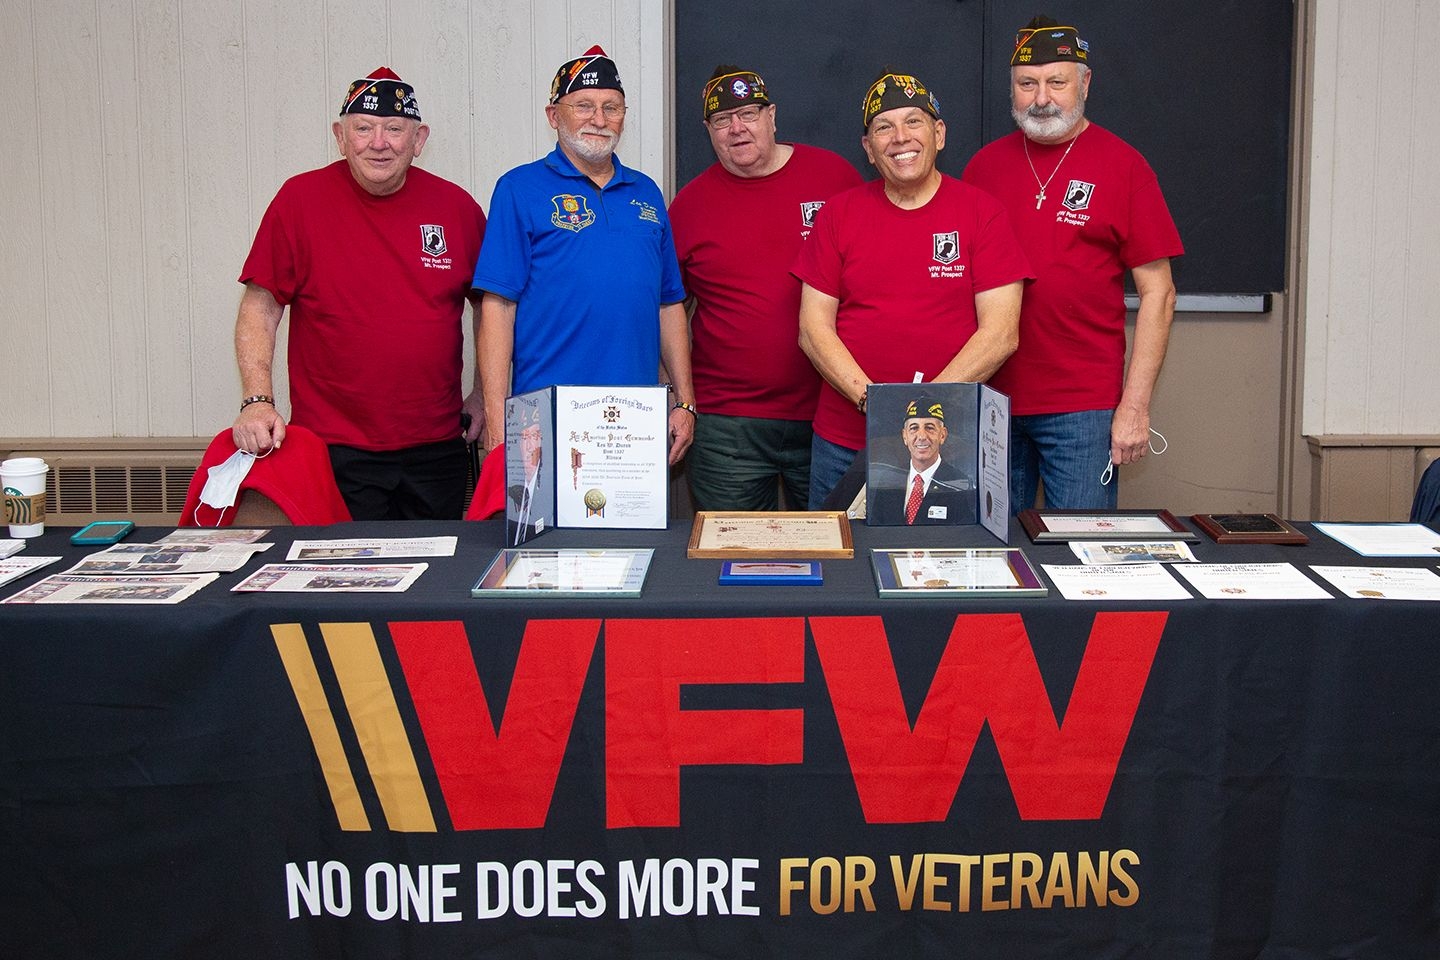 A VFW information table which we set up often allowing many to learn our mission